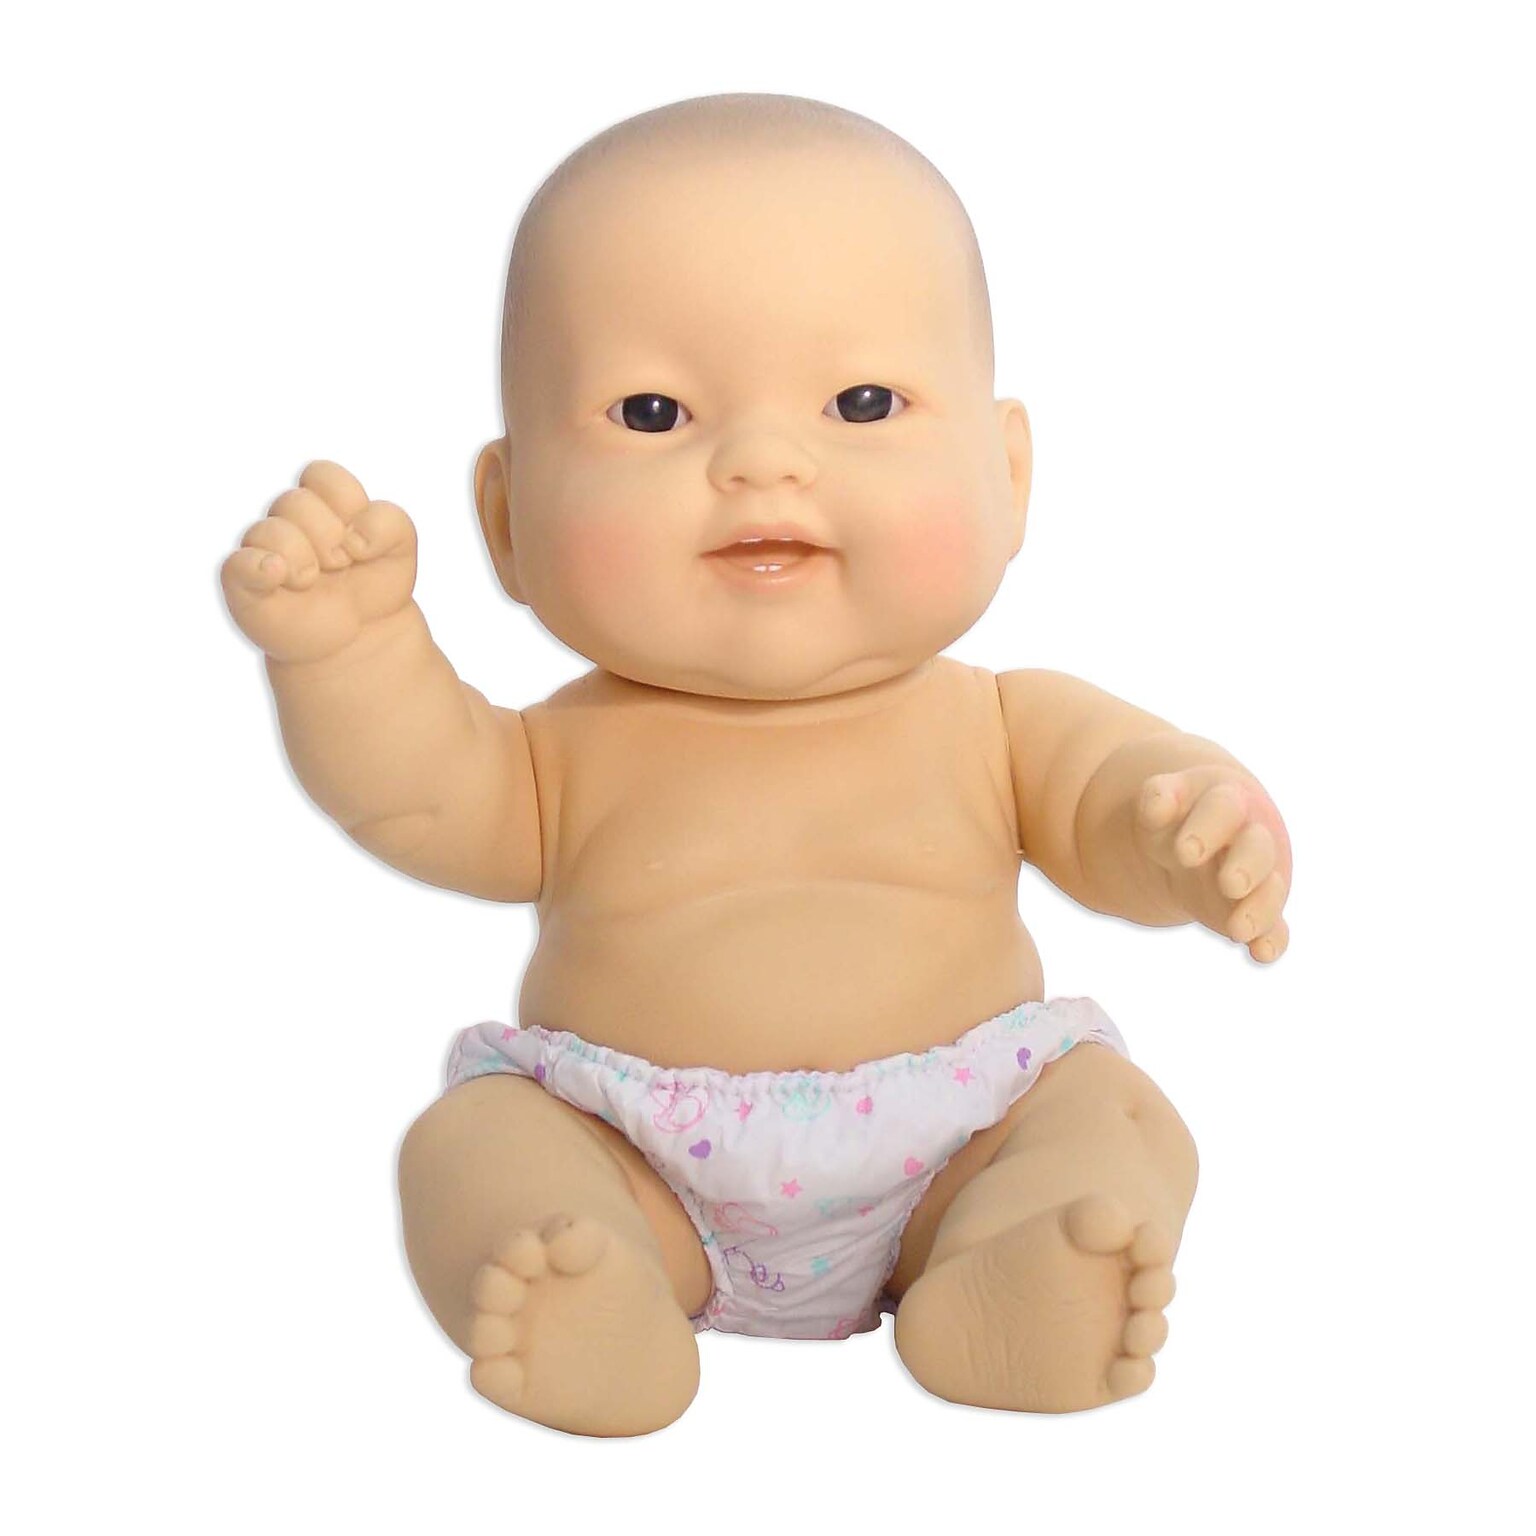 Jc Toys Group® Vinyl 10 Lots to Love® Baby Doll, Asian Baby (BER16540)